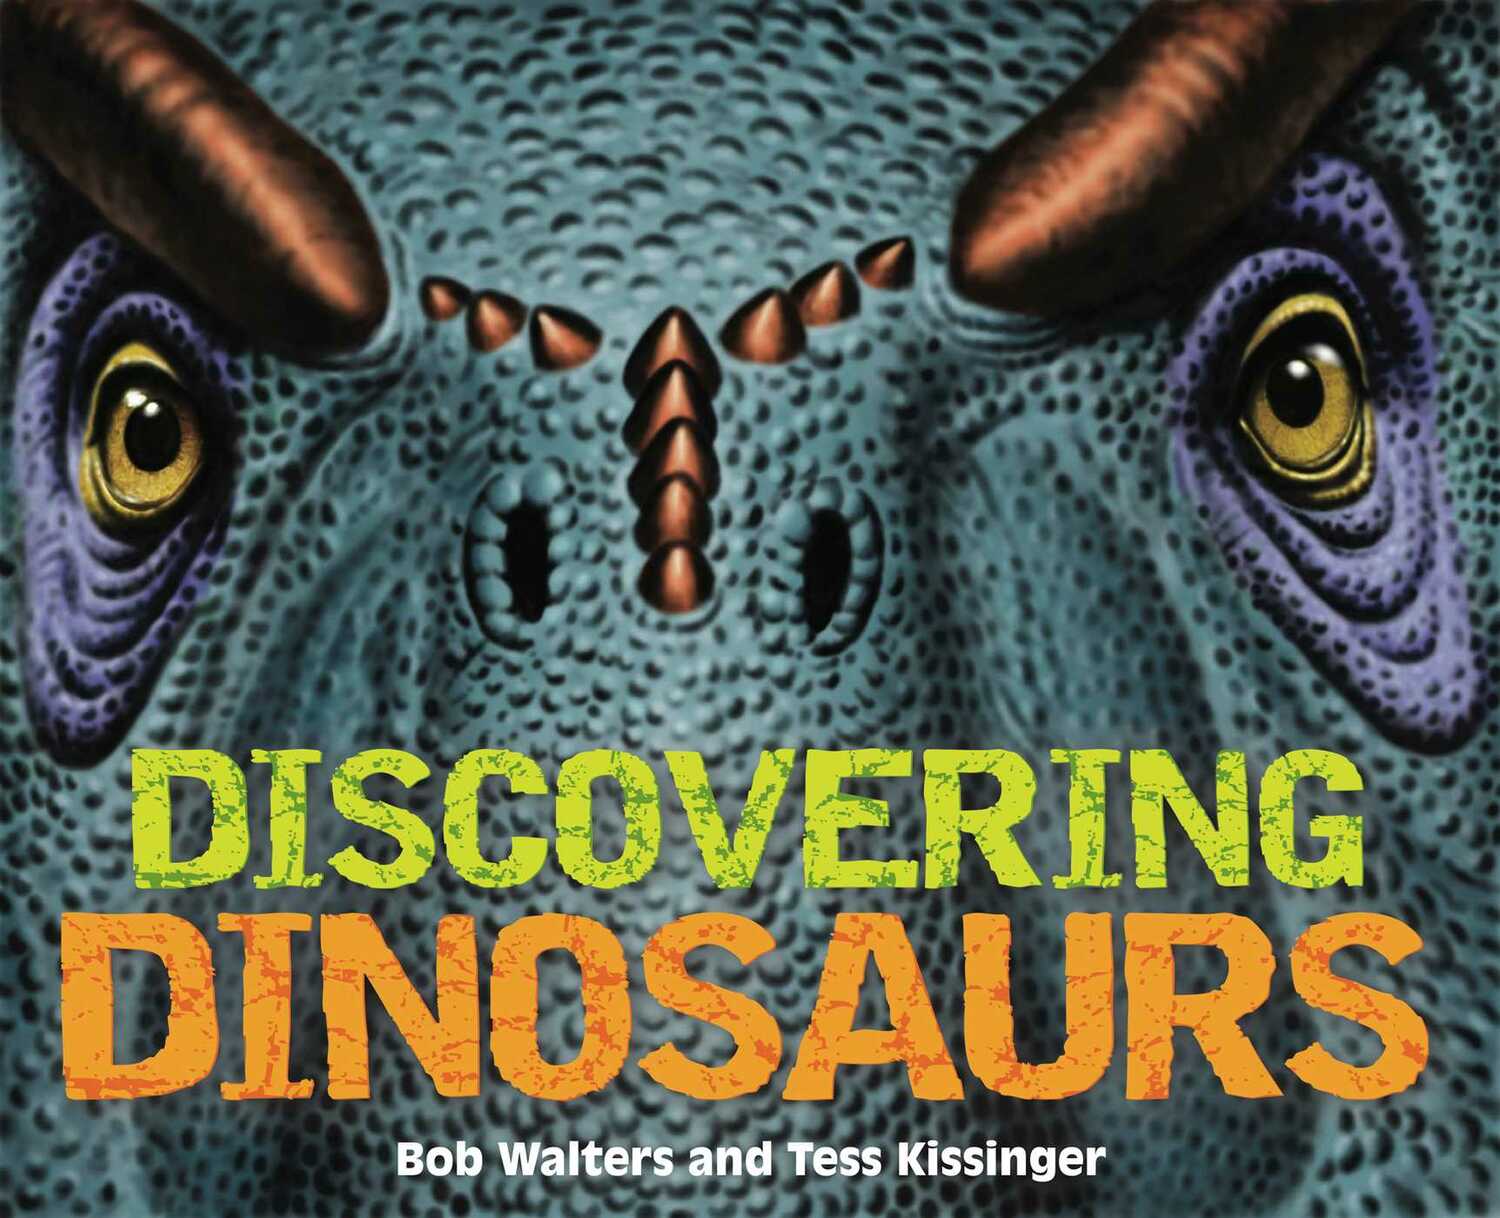 Discovering Dinosaurs: The Ultimate Guide to the Age of Dinosaurs